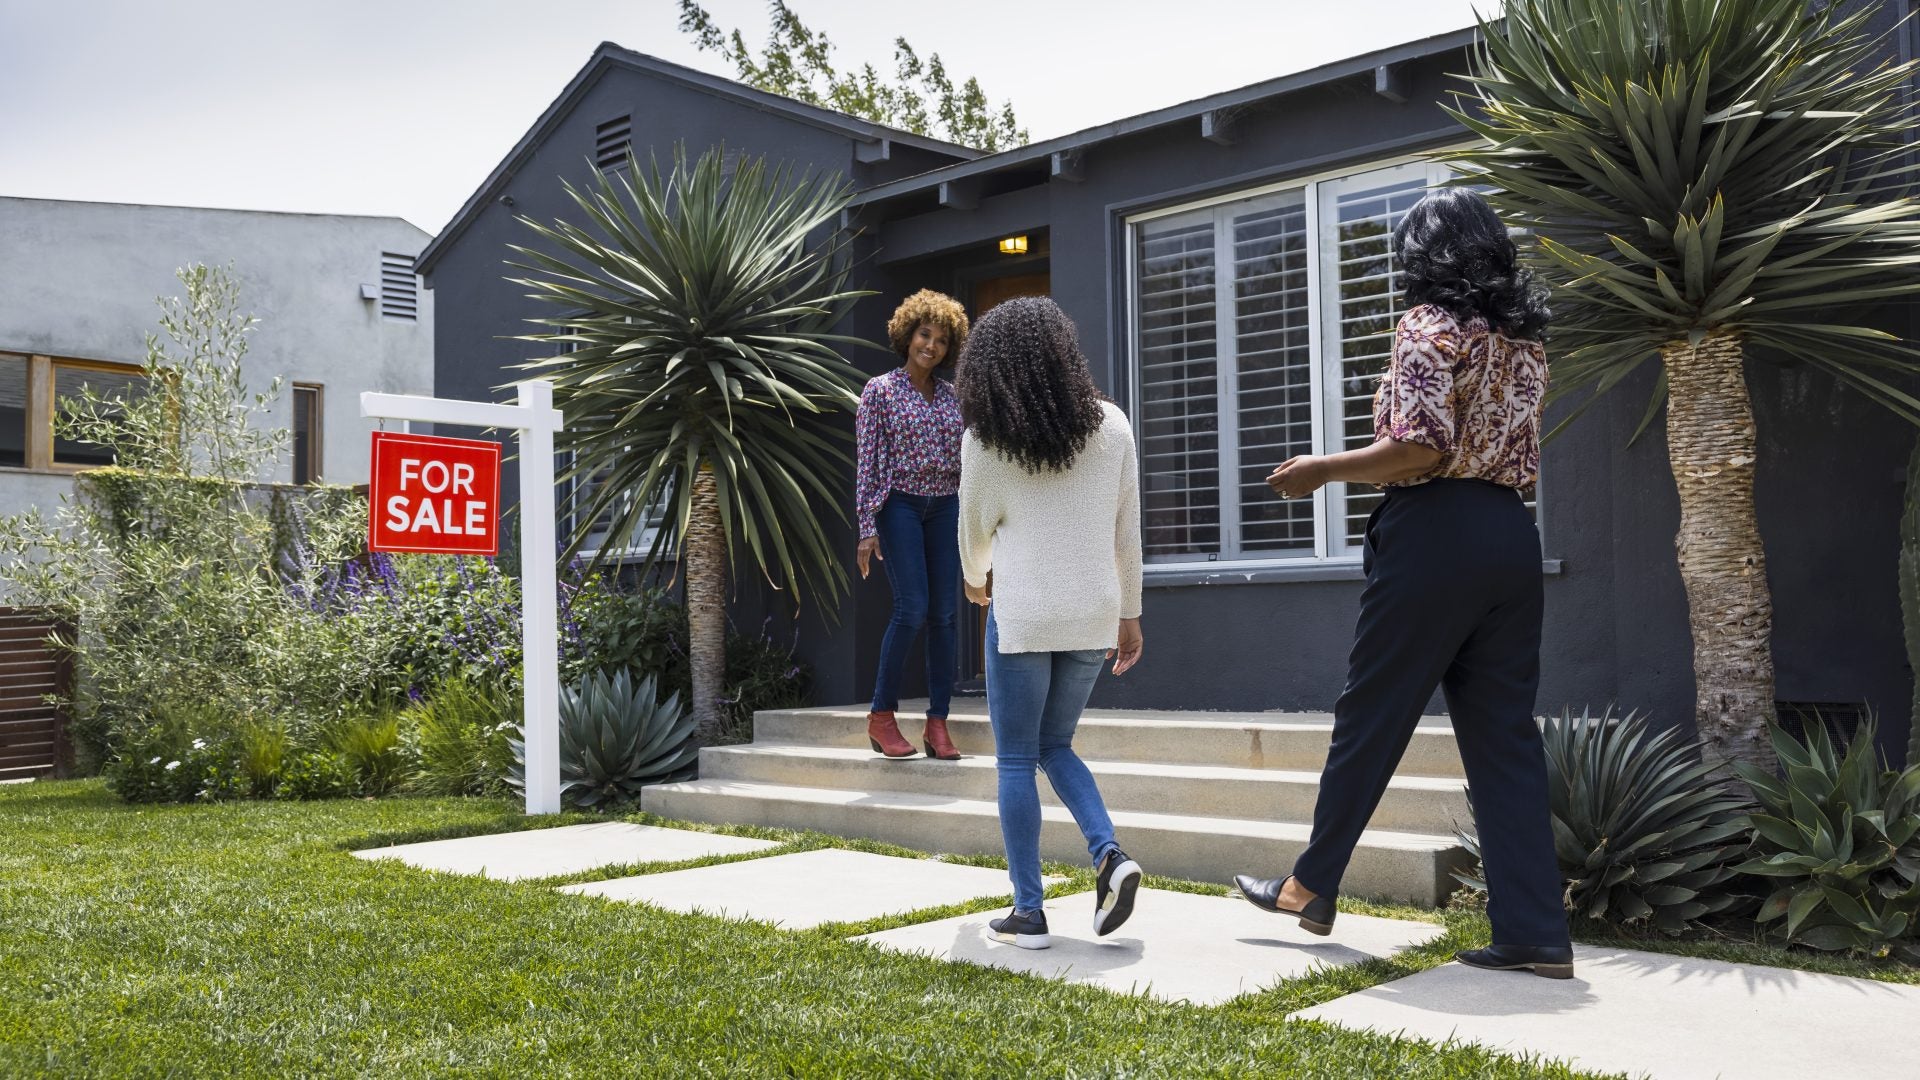 Black Buyers Left Out Of Booming Housing Market